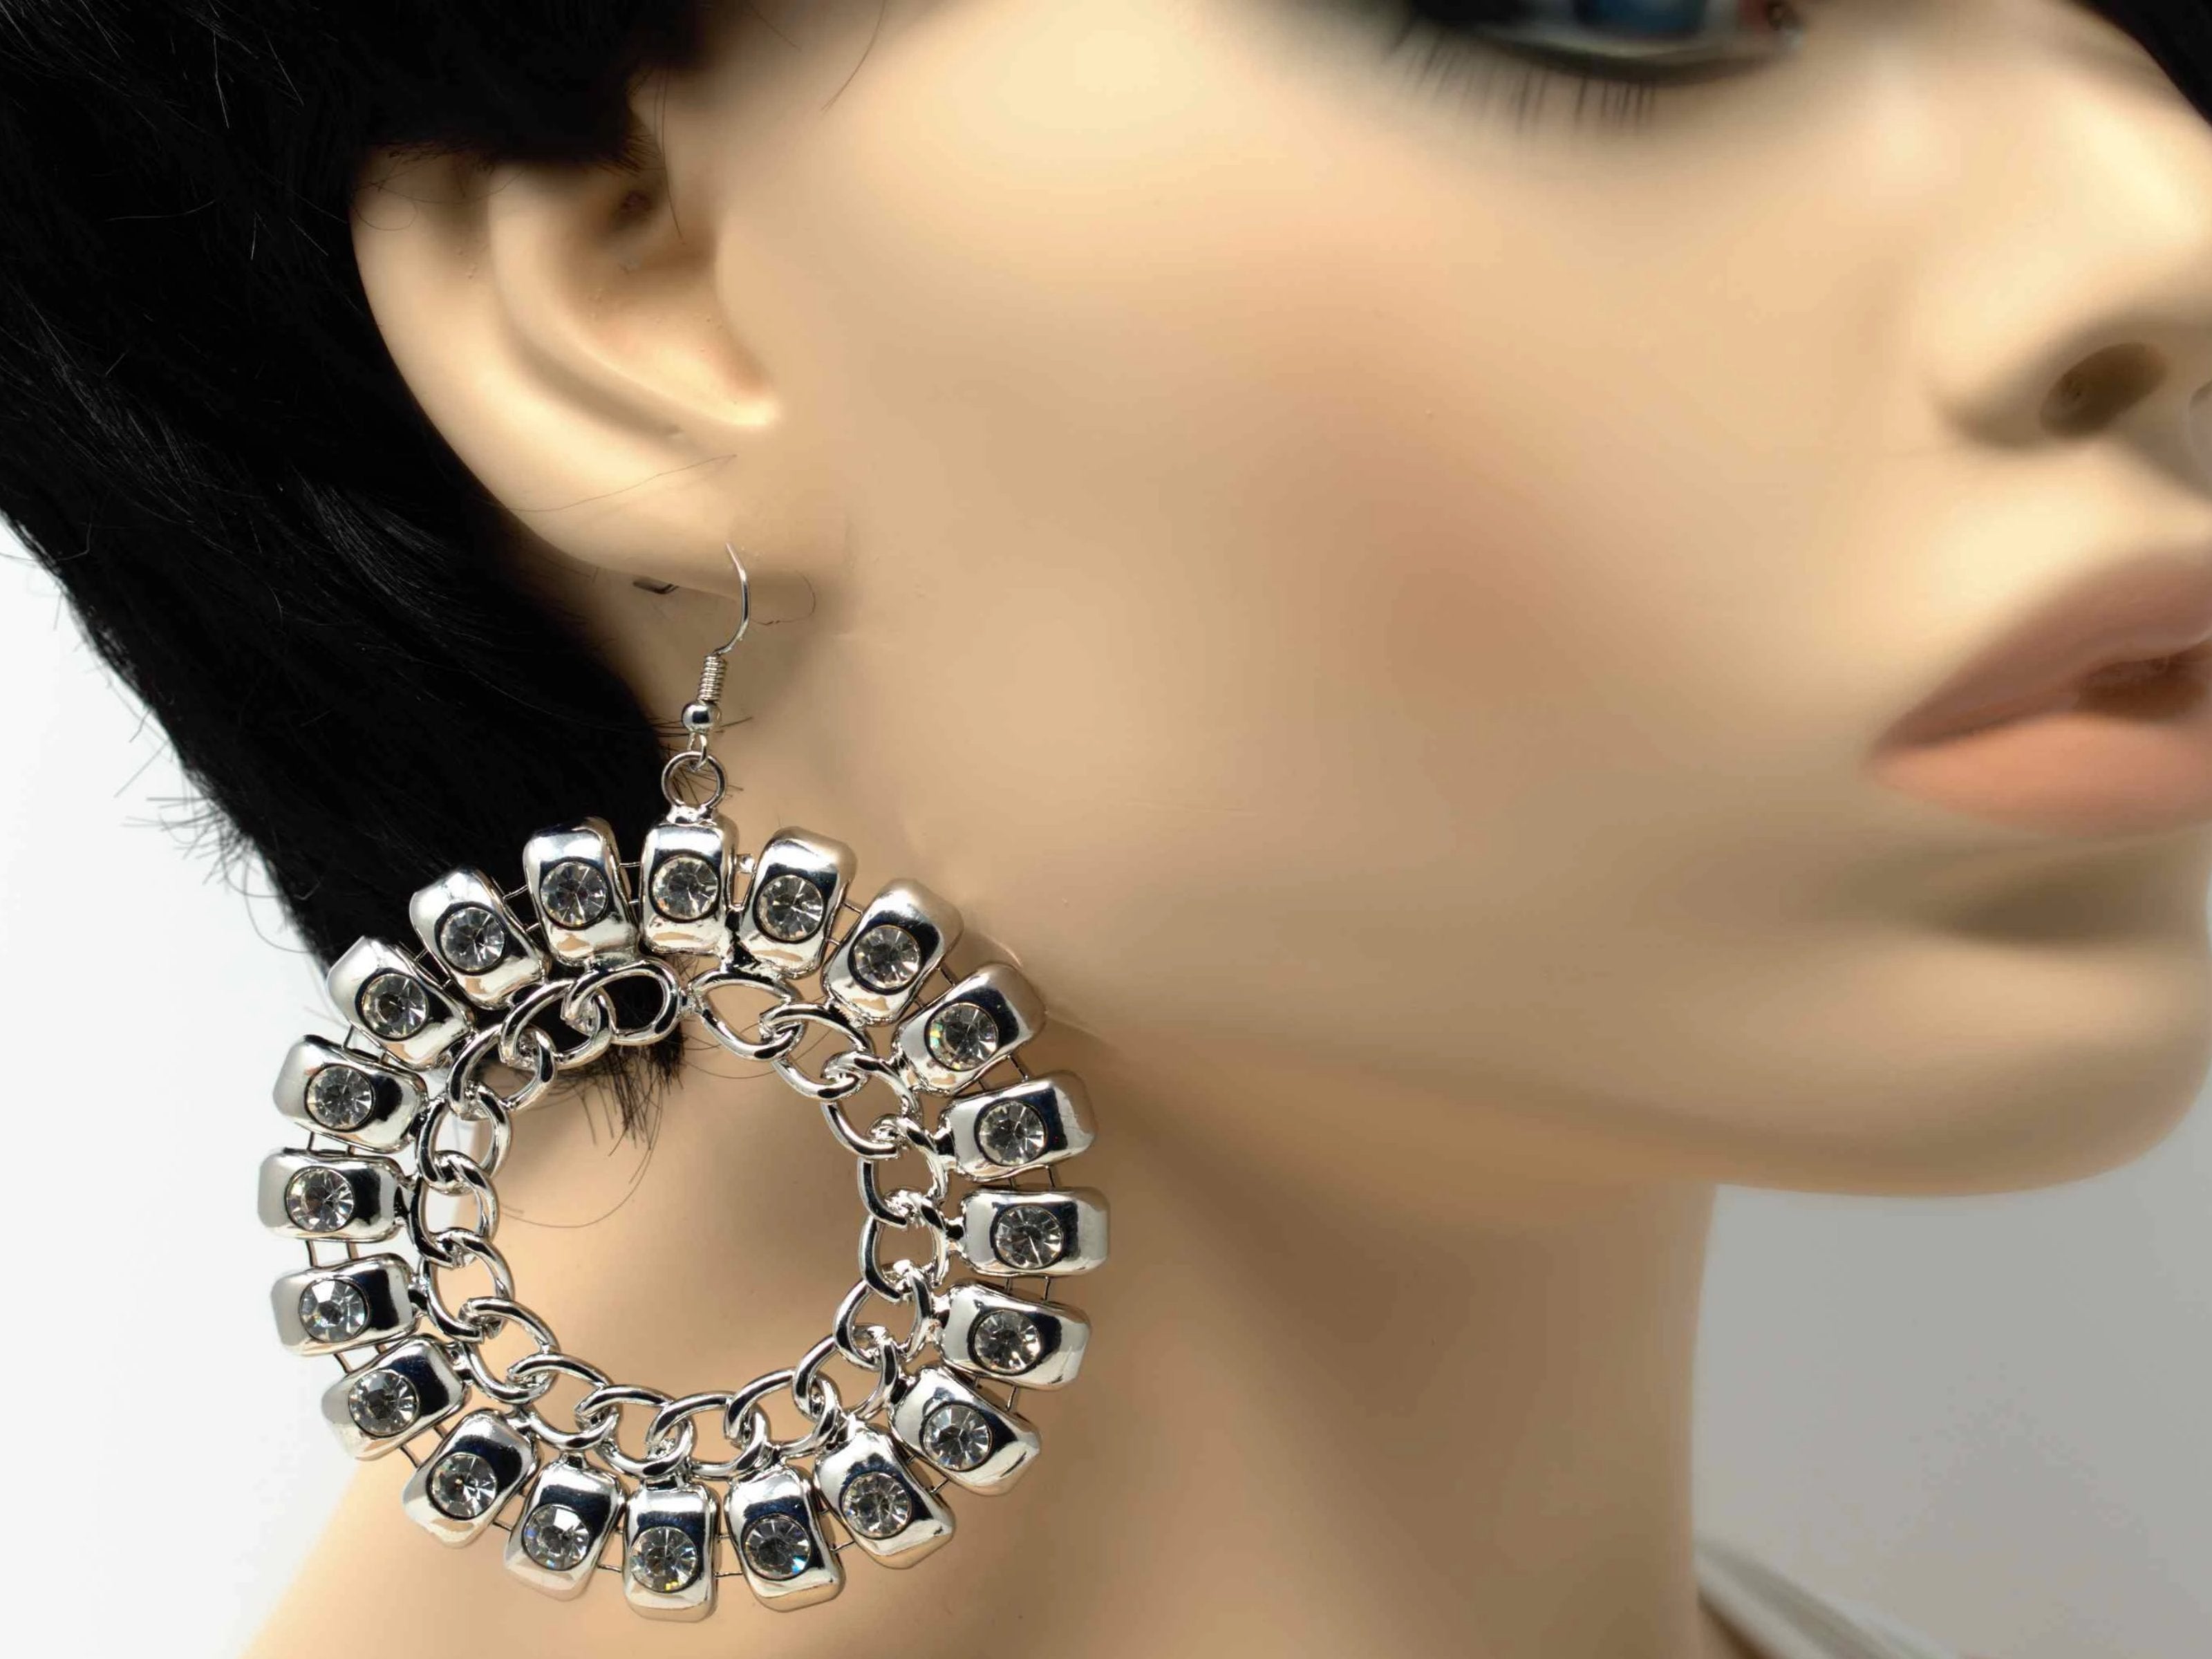 An exquisite silver dangle drop fashion earring with stones and chain accent and a fish hook clasp.